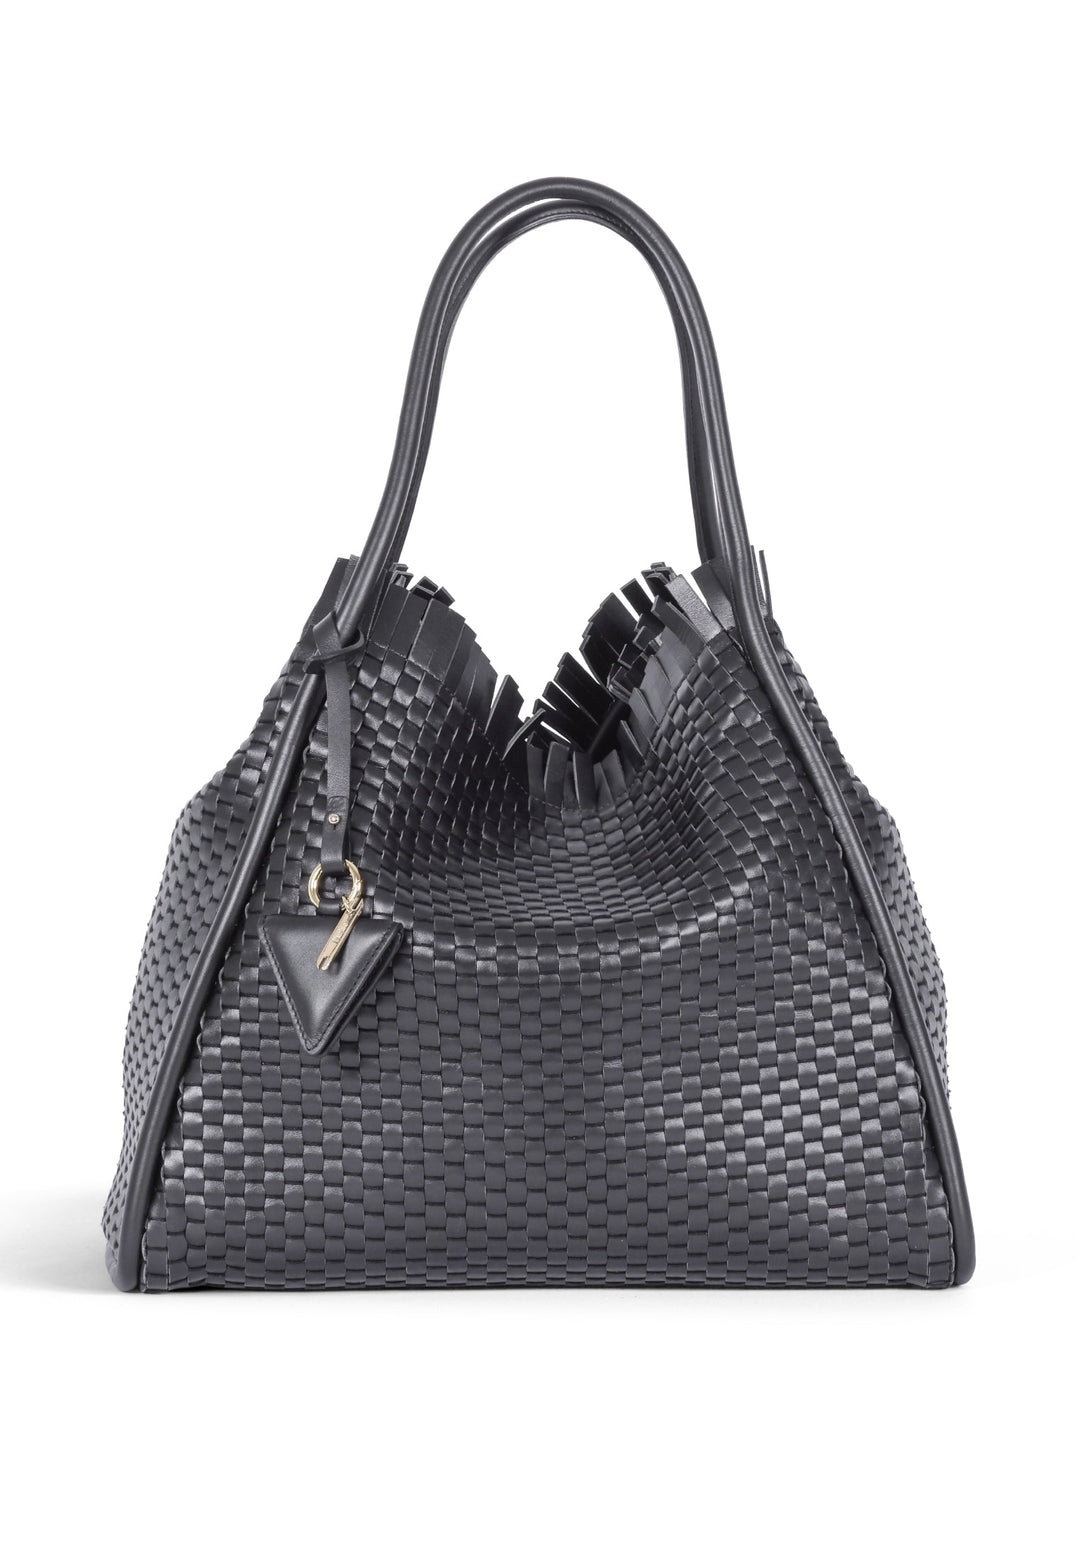 Woven black leather handbag with structured handles and gold-tone clasp detail